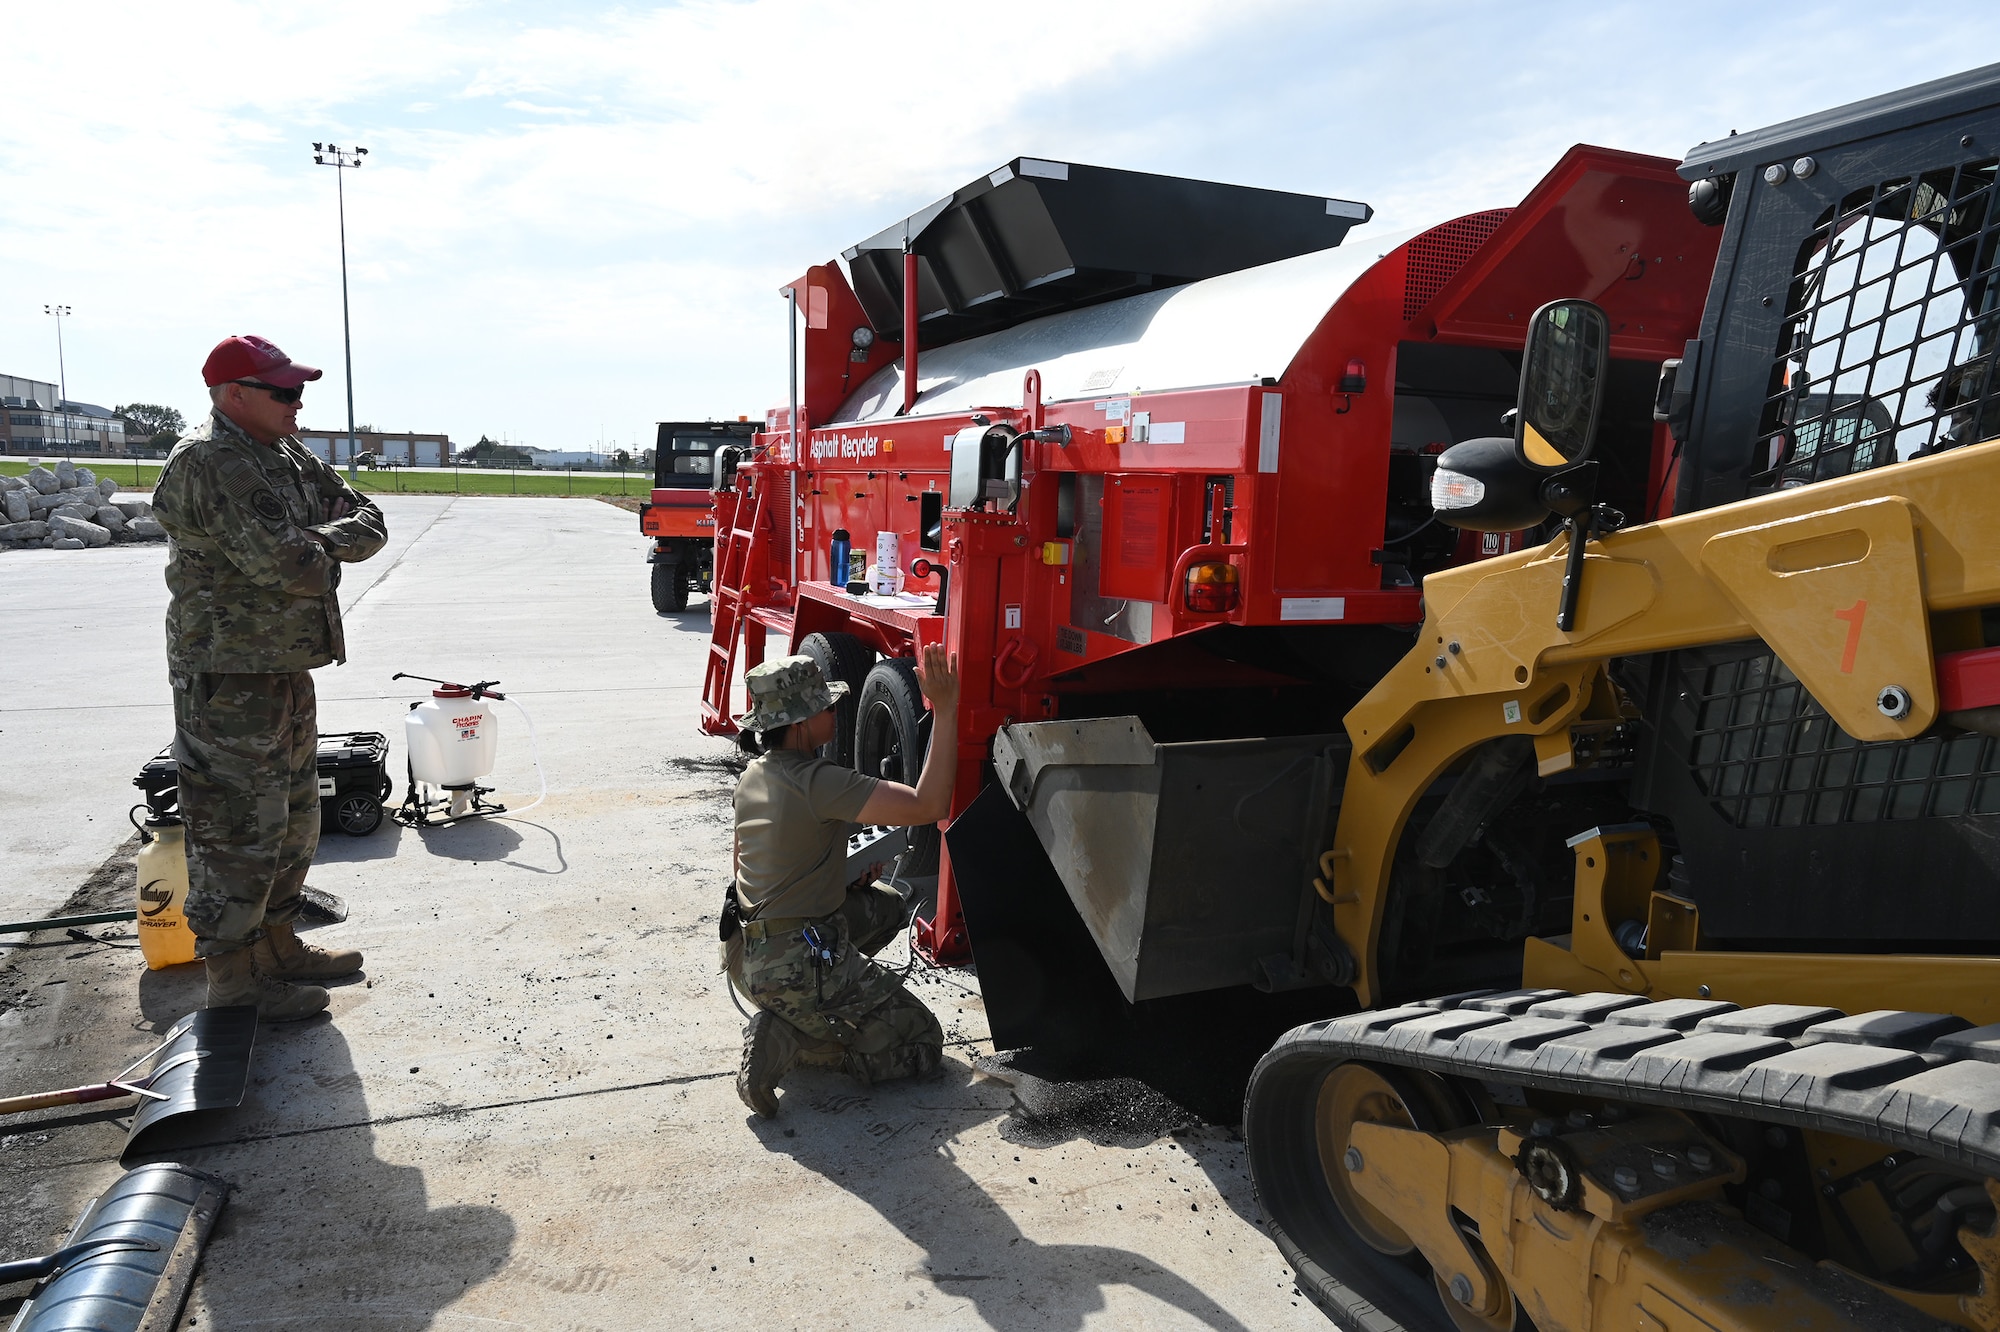 Two military members operate a large red machine as called an asphalt recycler as it heats asphalt material for use patching holes on a large concrete training runway at the North Dakota Air National Guard Regional Training Site, Fargo, N.D., Sept. 29, 2021.